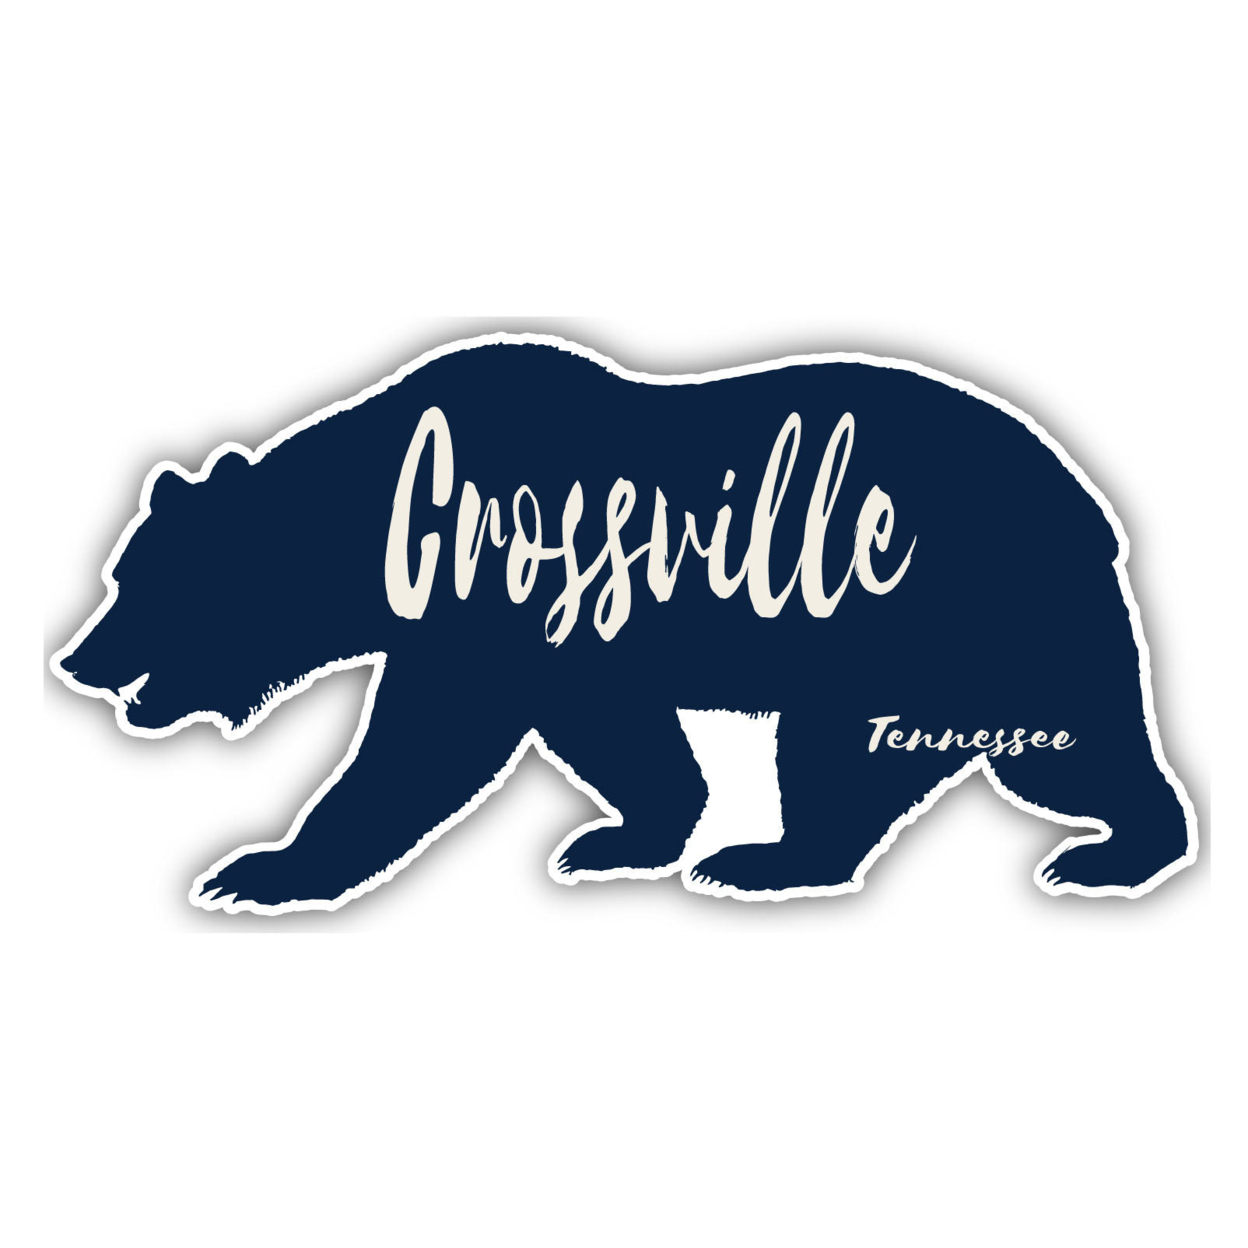 Crossville Tennessee Souvenir Decorative Stickers (Choose Theme And Size) - 4-Pack, 8-Inch, Bear